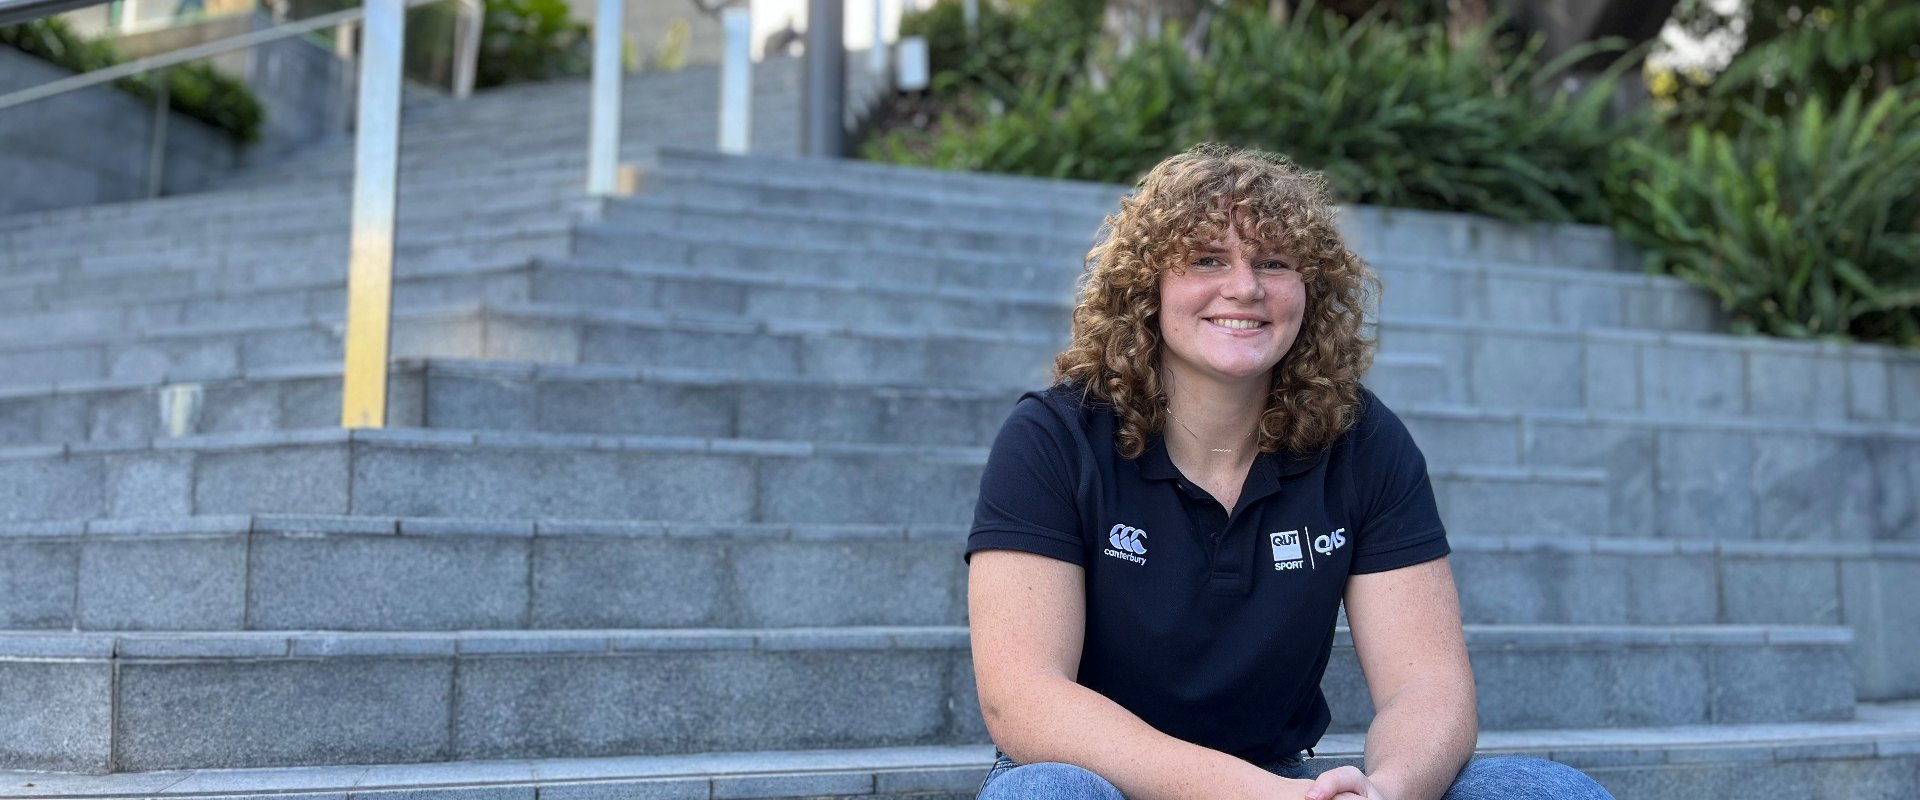 QAS-supported water polo athlete and QUT scholarship recipient Matilda Moore